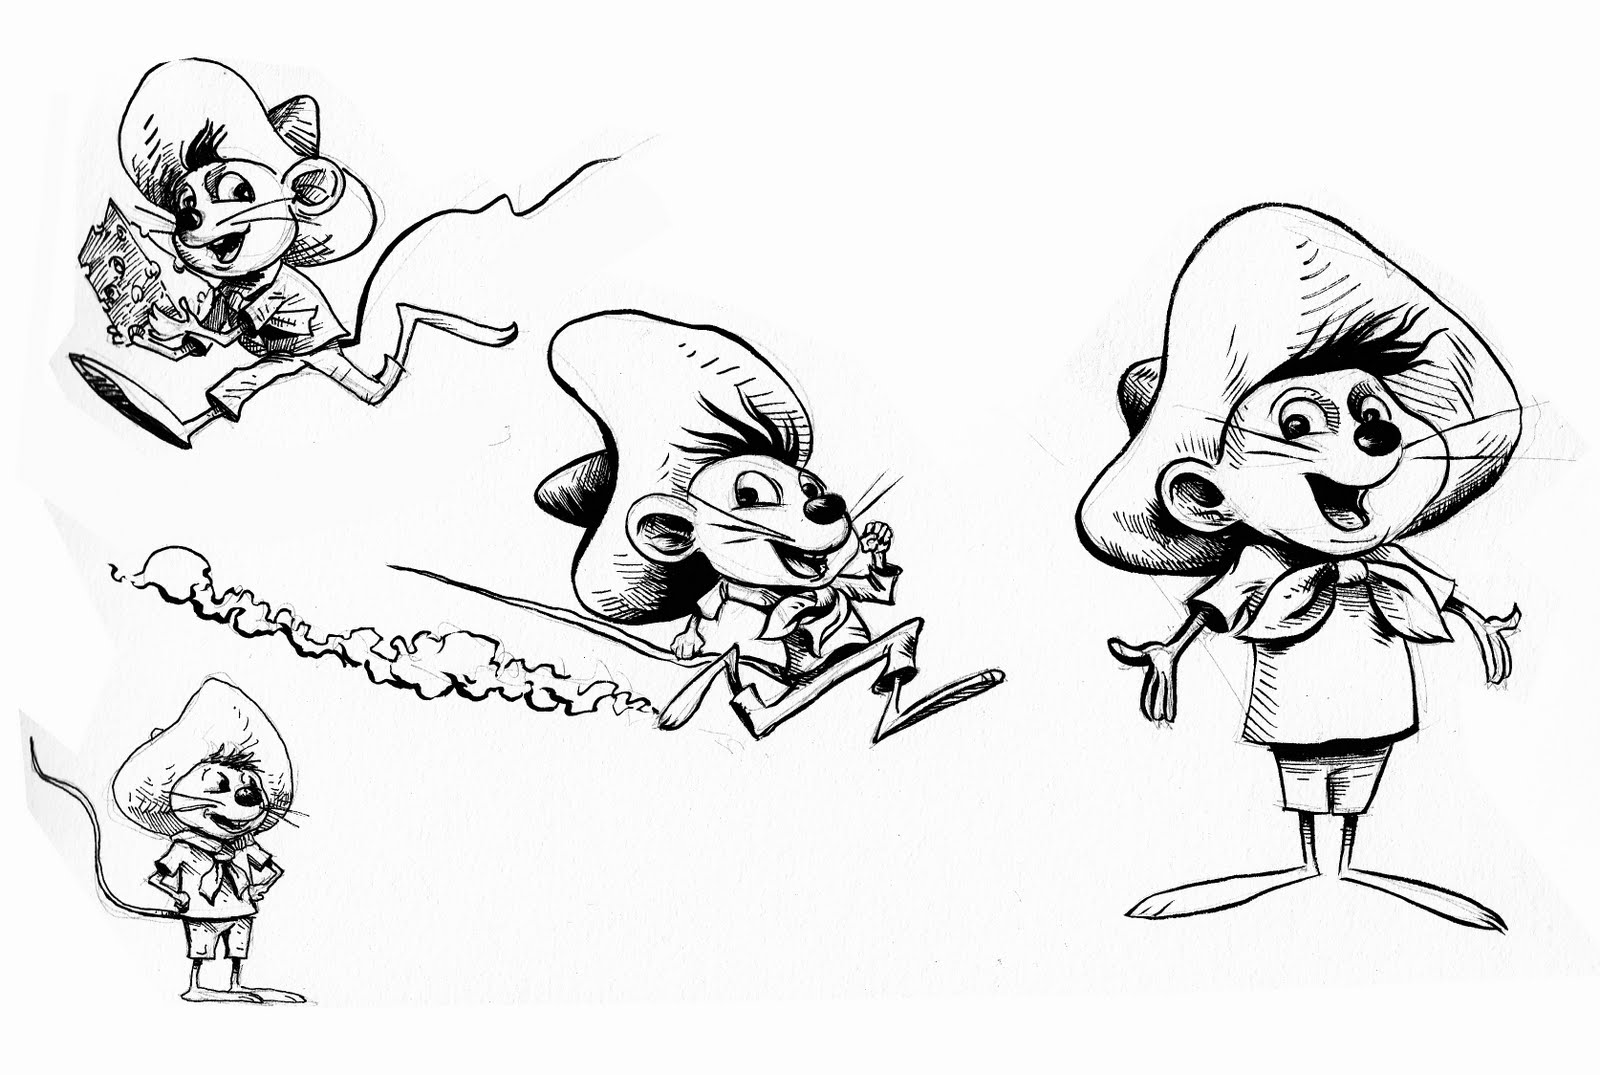 Speedy Gonzales #30801 (Cartoons) ➜ Coloring pages for Cartoons....